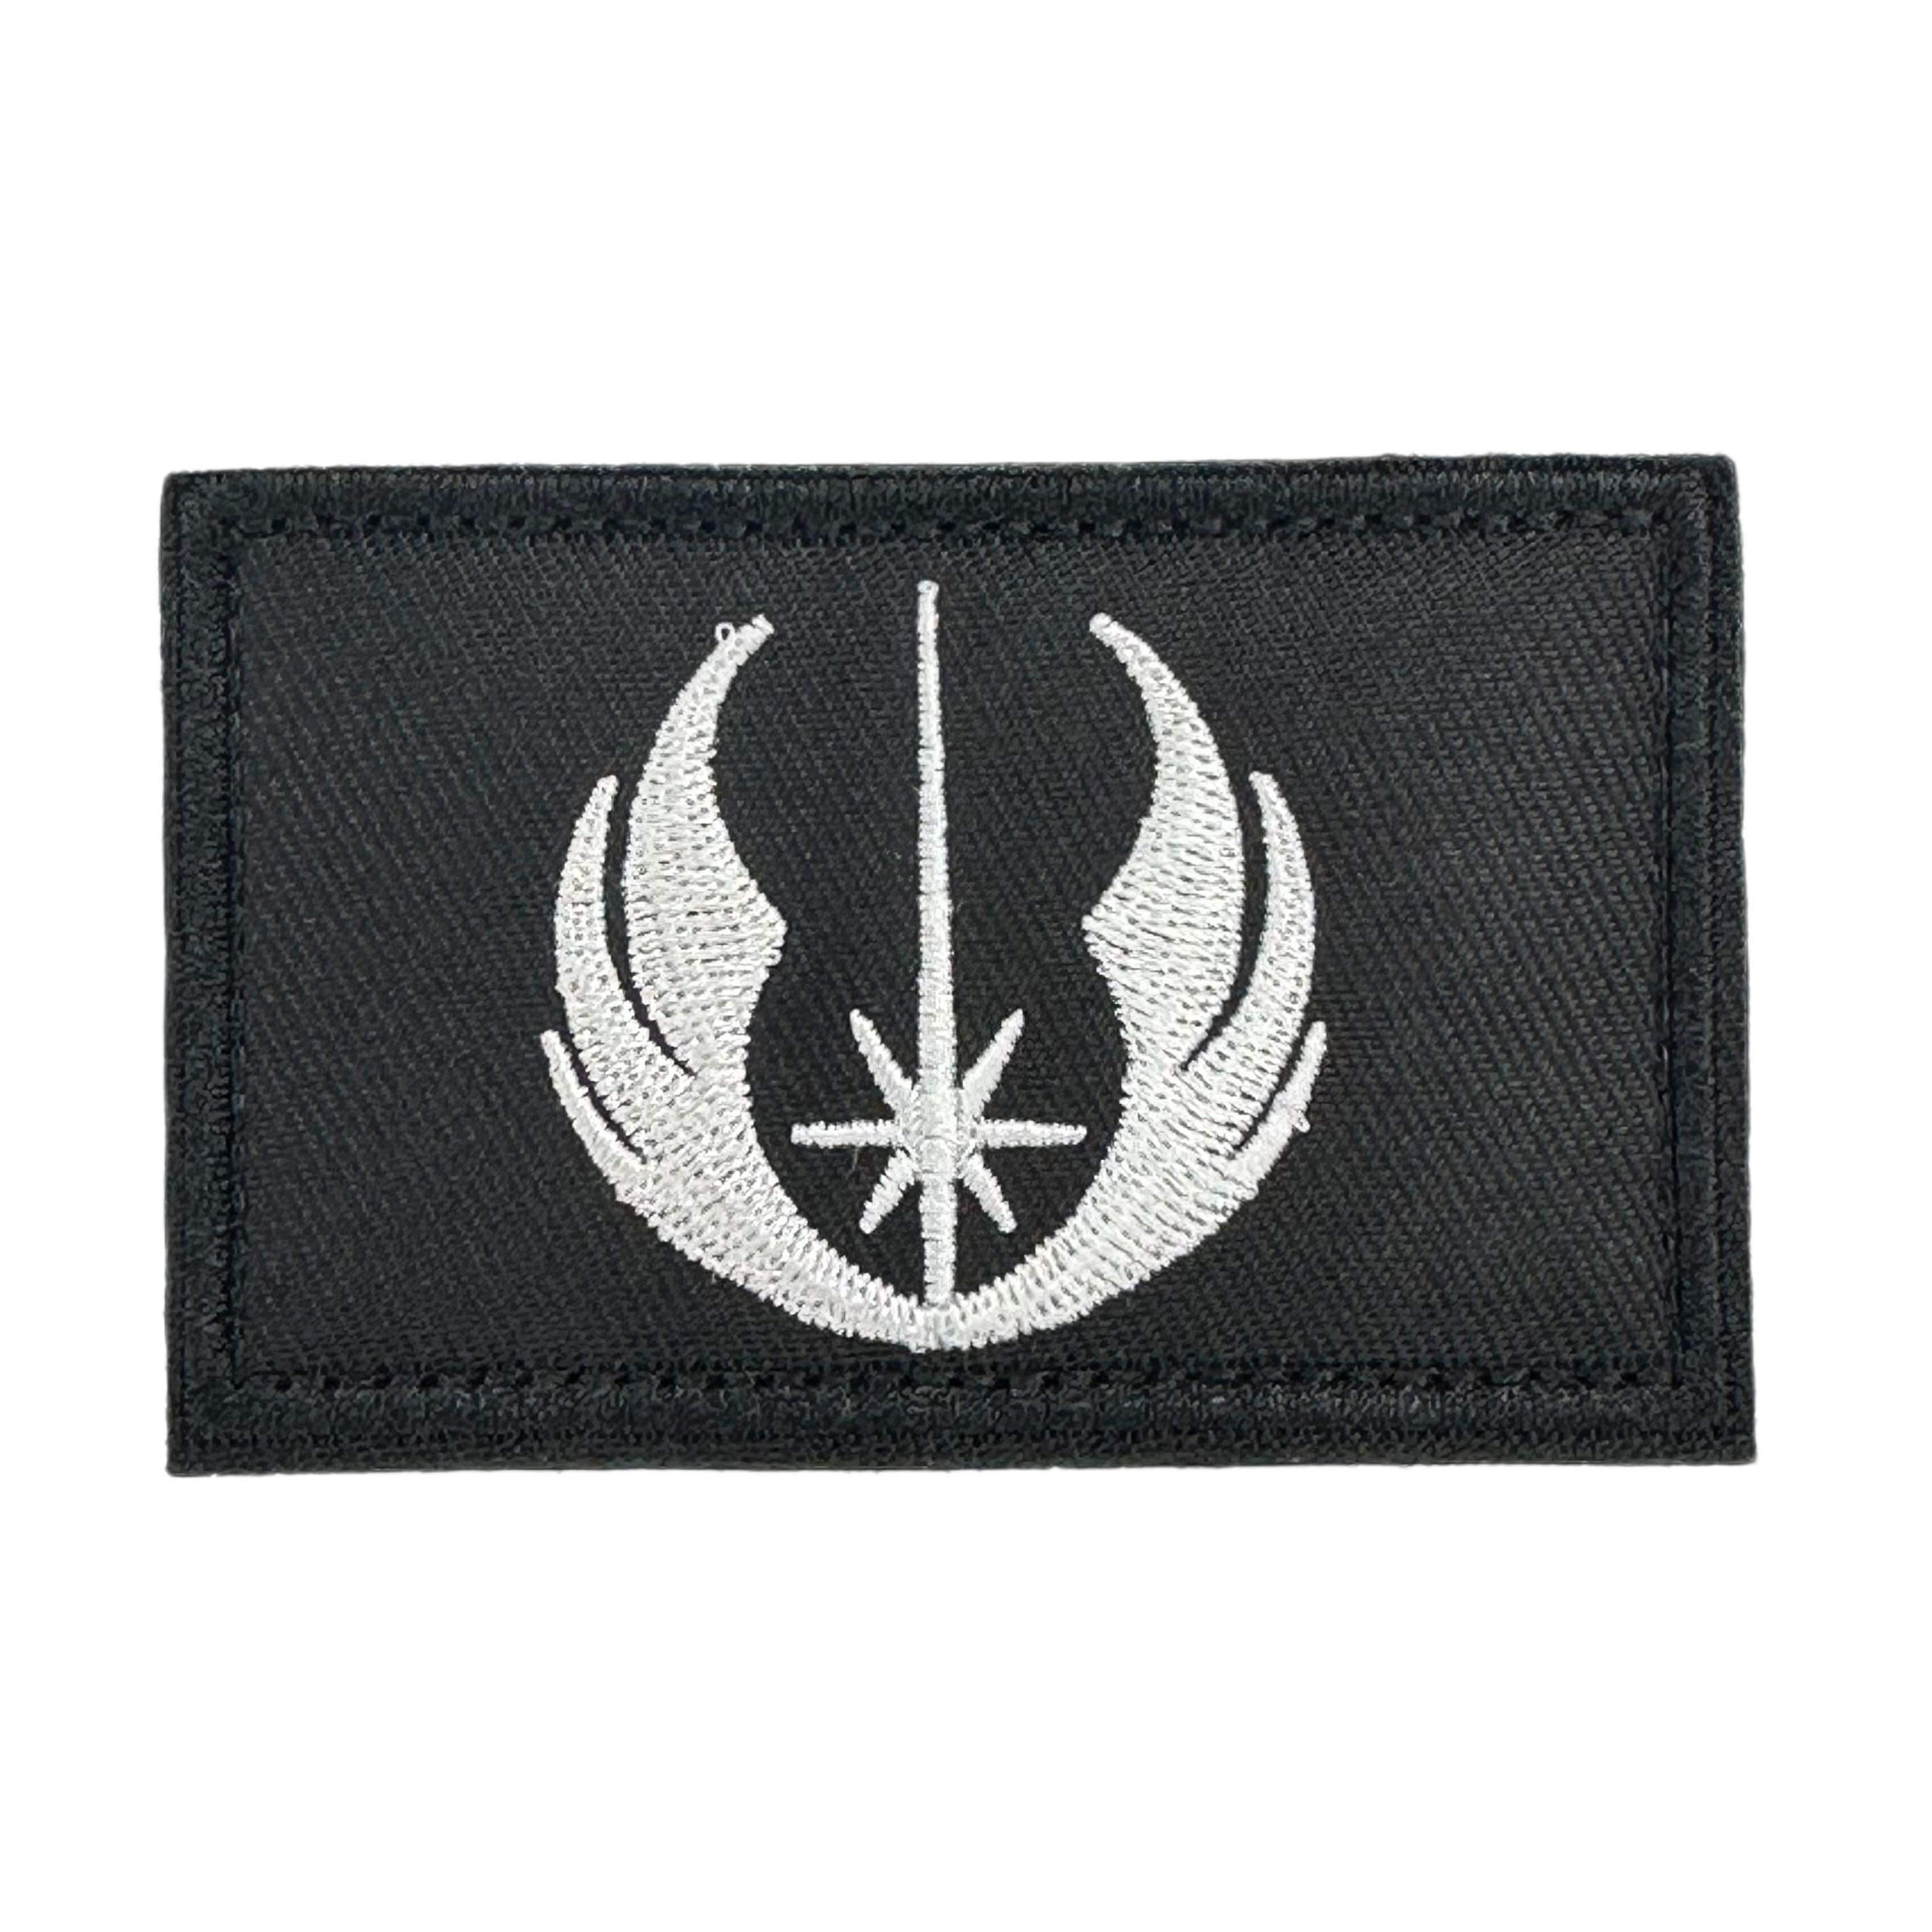 Embroidery Patch - Jedi Order